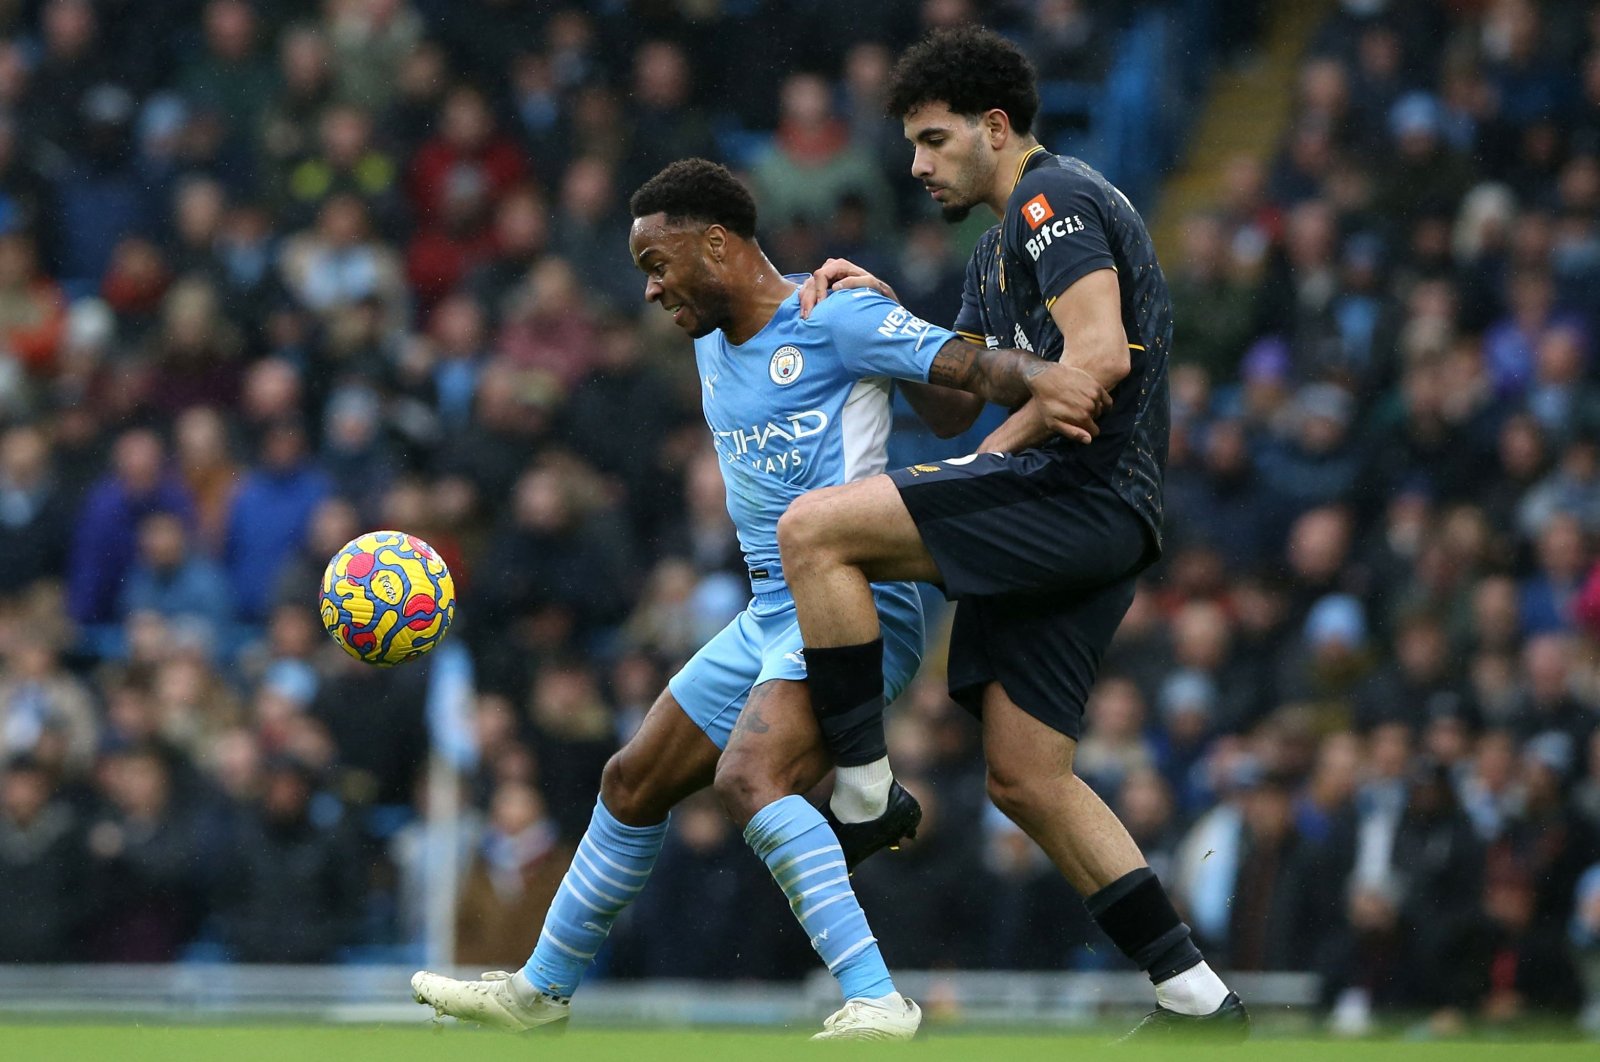 Man City&#039;s Raheem Sterling (L) vies with Wolves&#039; Rayan Ait-Nouri during a Premier League match at the Etihad Stadium, Manchester, England, Dec. 11, 2021. (AFP Photo)